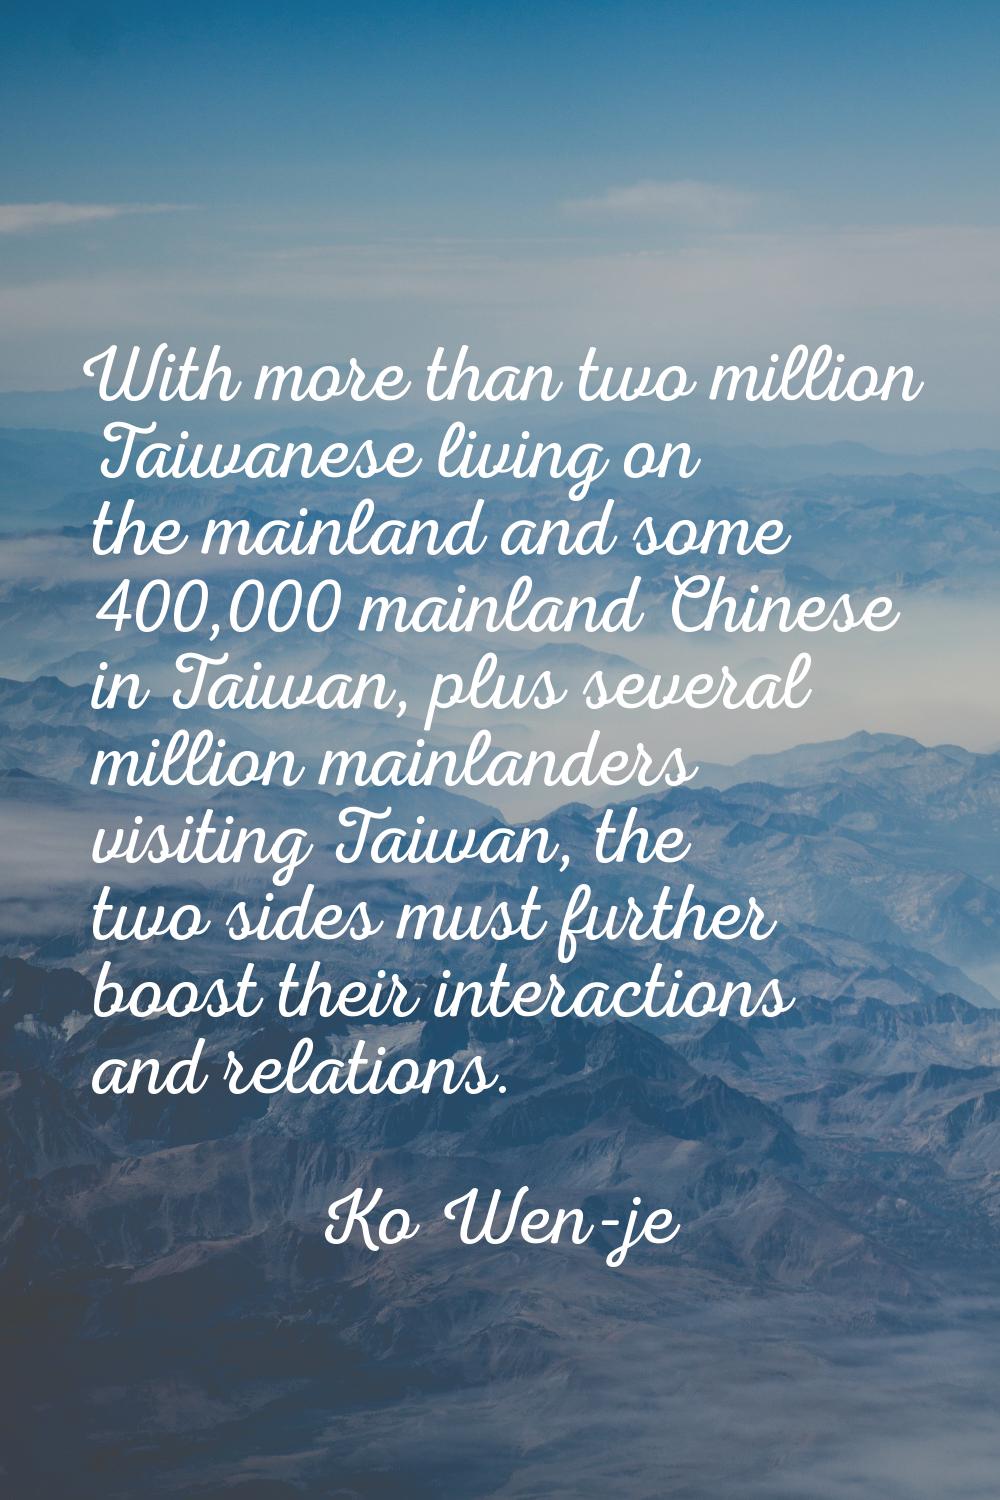 With more than two million Taiwanese living on the mainland and some 400,000 mainland Chinese in Ta